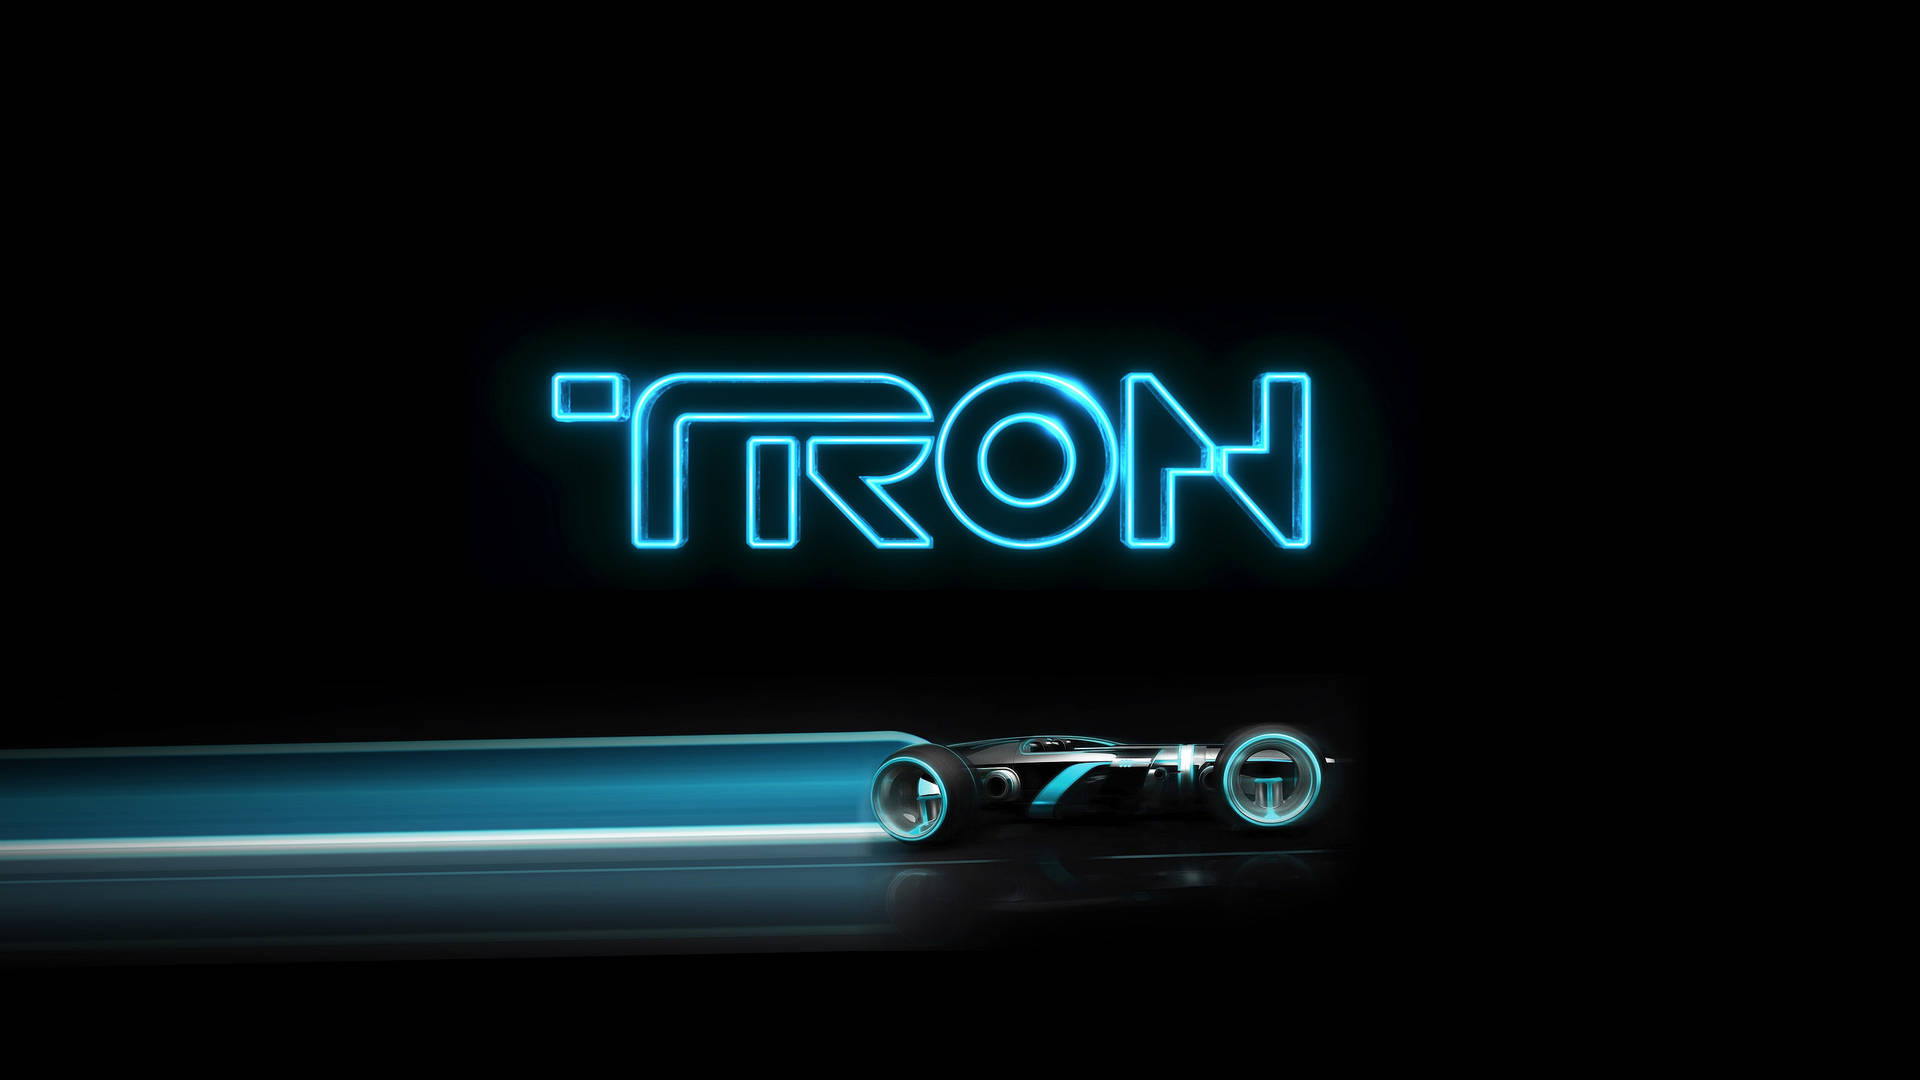 Dive Into The Cyberworld with Tron Wallpaper